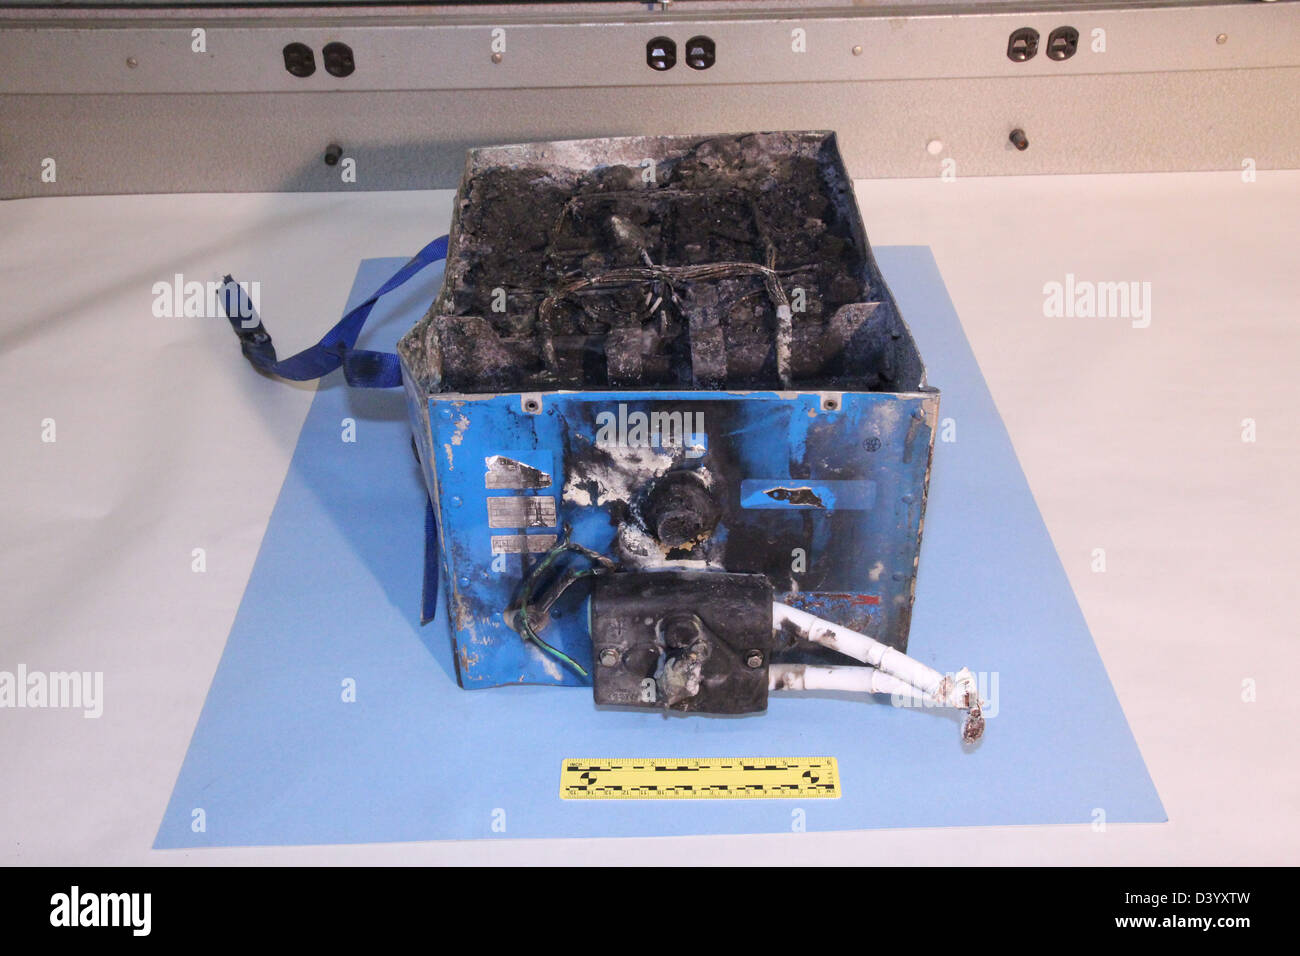 NTSB photos of the burned auxiliary power unit battery from a JAL Boeing 787 that caught fire on January 7, 2013 at Boston's Logan International Airport. The dimensions of the battery are 19x13.2x10.2 inches and it weighs approximately 63 pounds Stock Photo